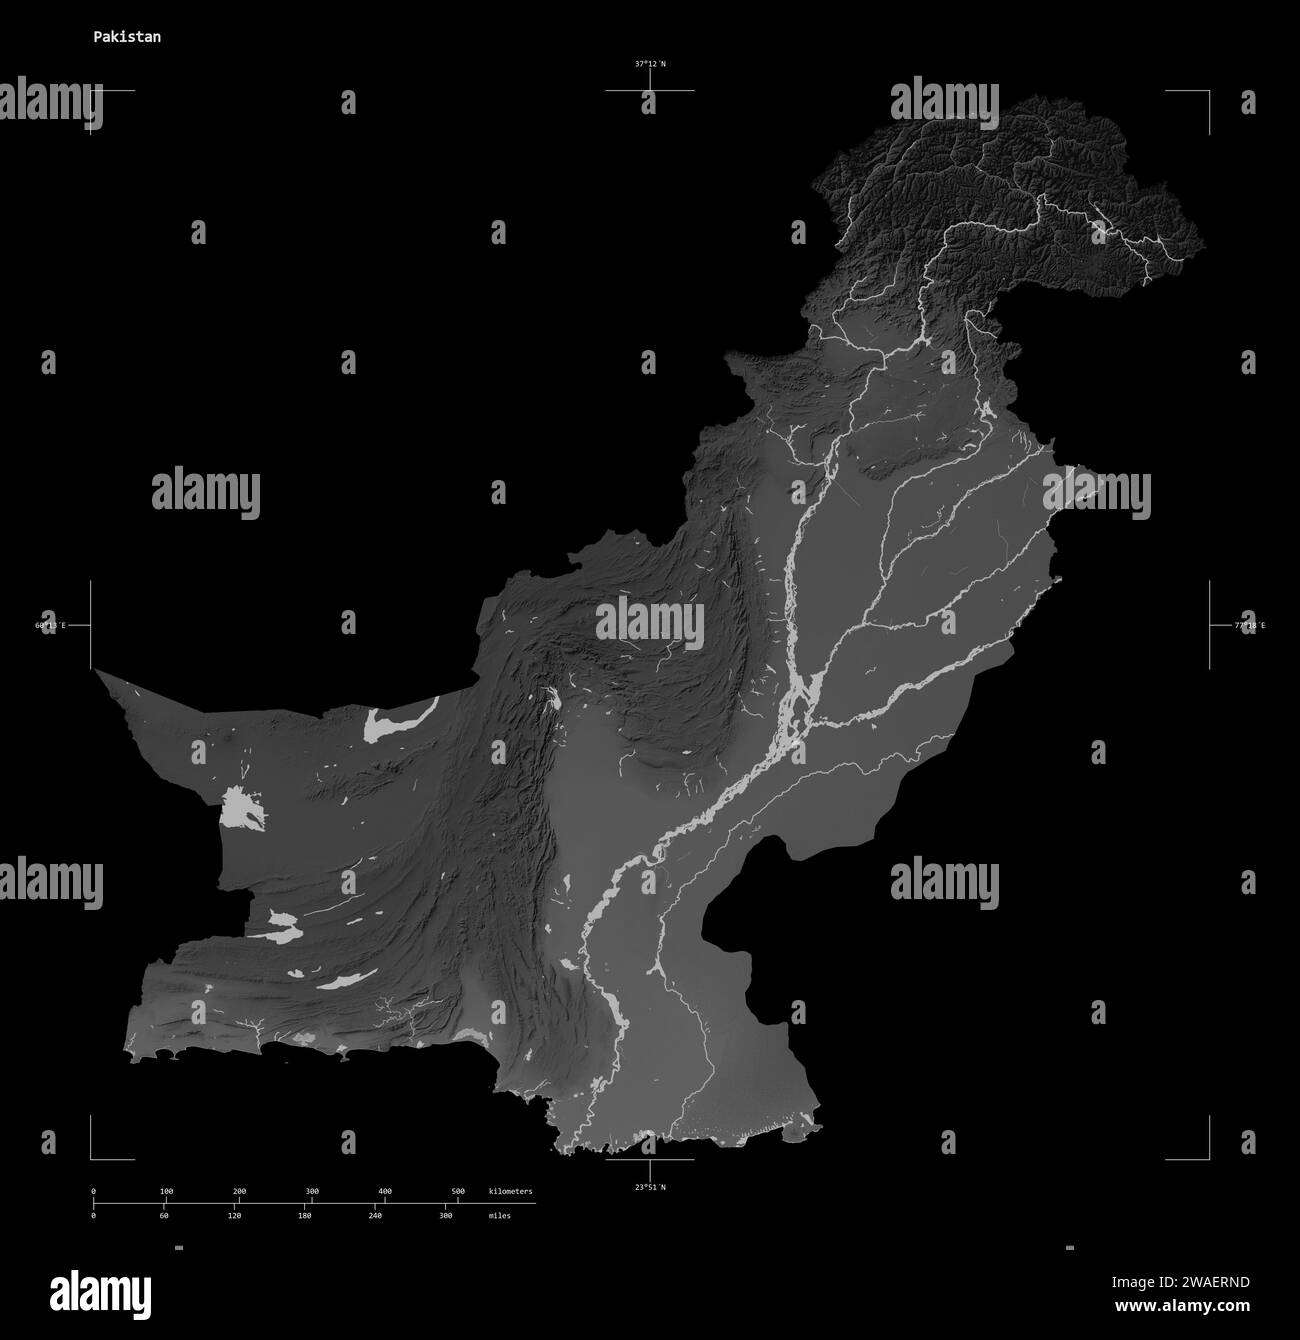 Shape of a Grayscale elevation map with lakes and rivers of the Pakistan, with distance scale and map border coordinates, isolated on black Stock Photo